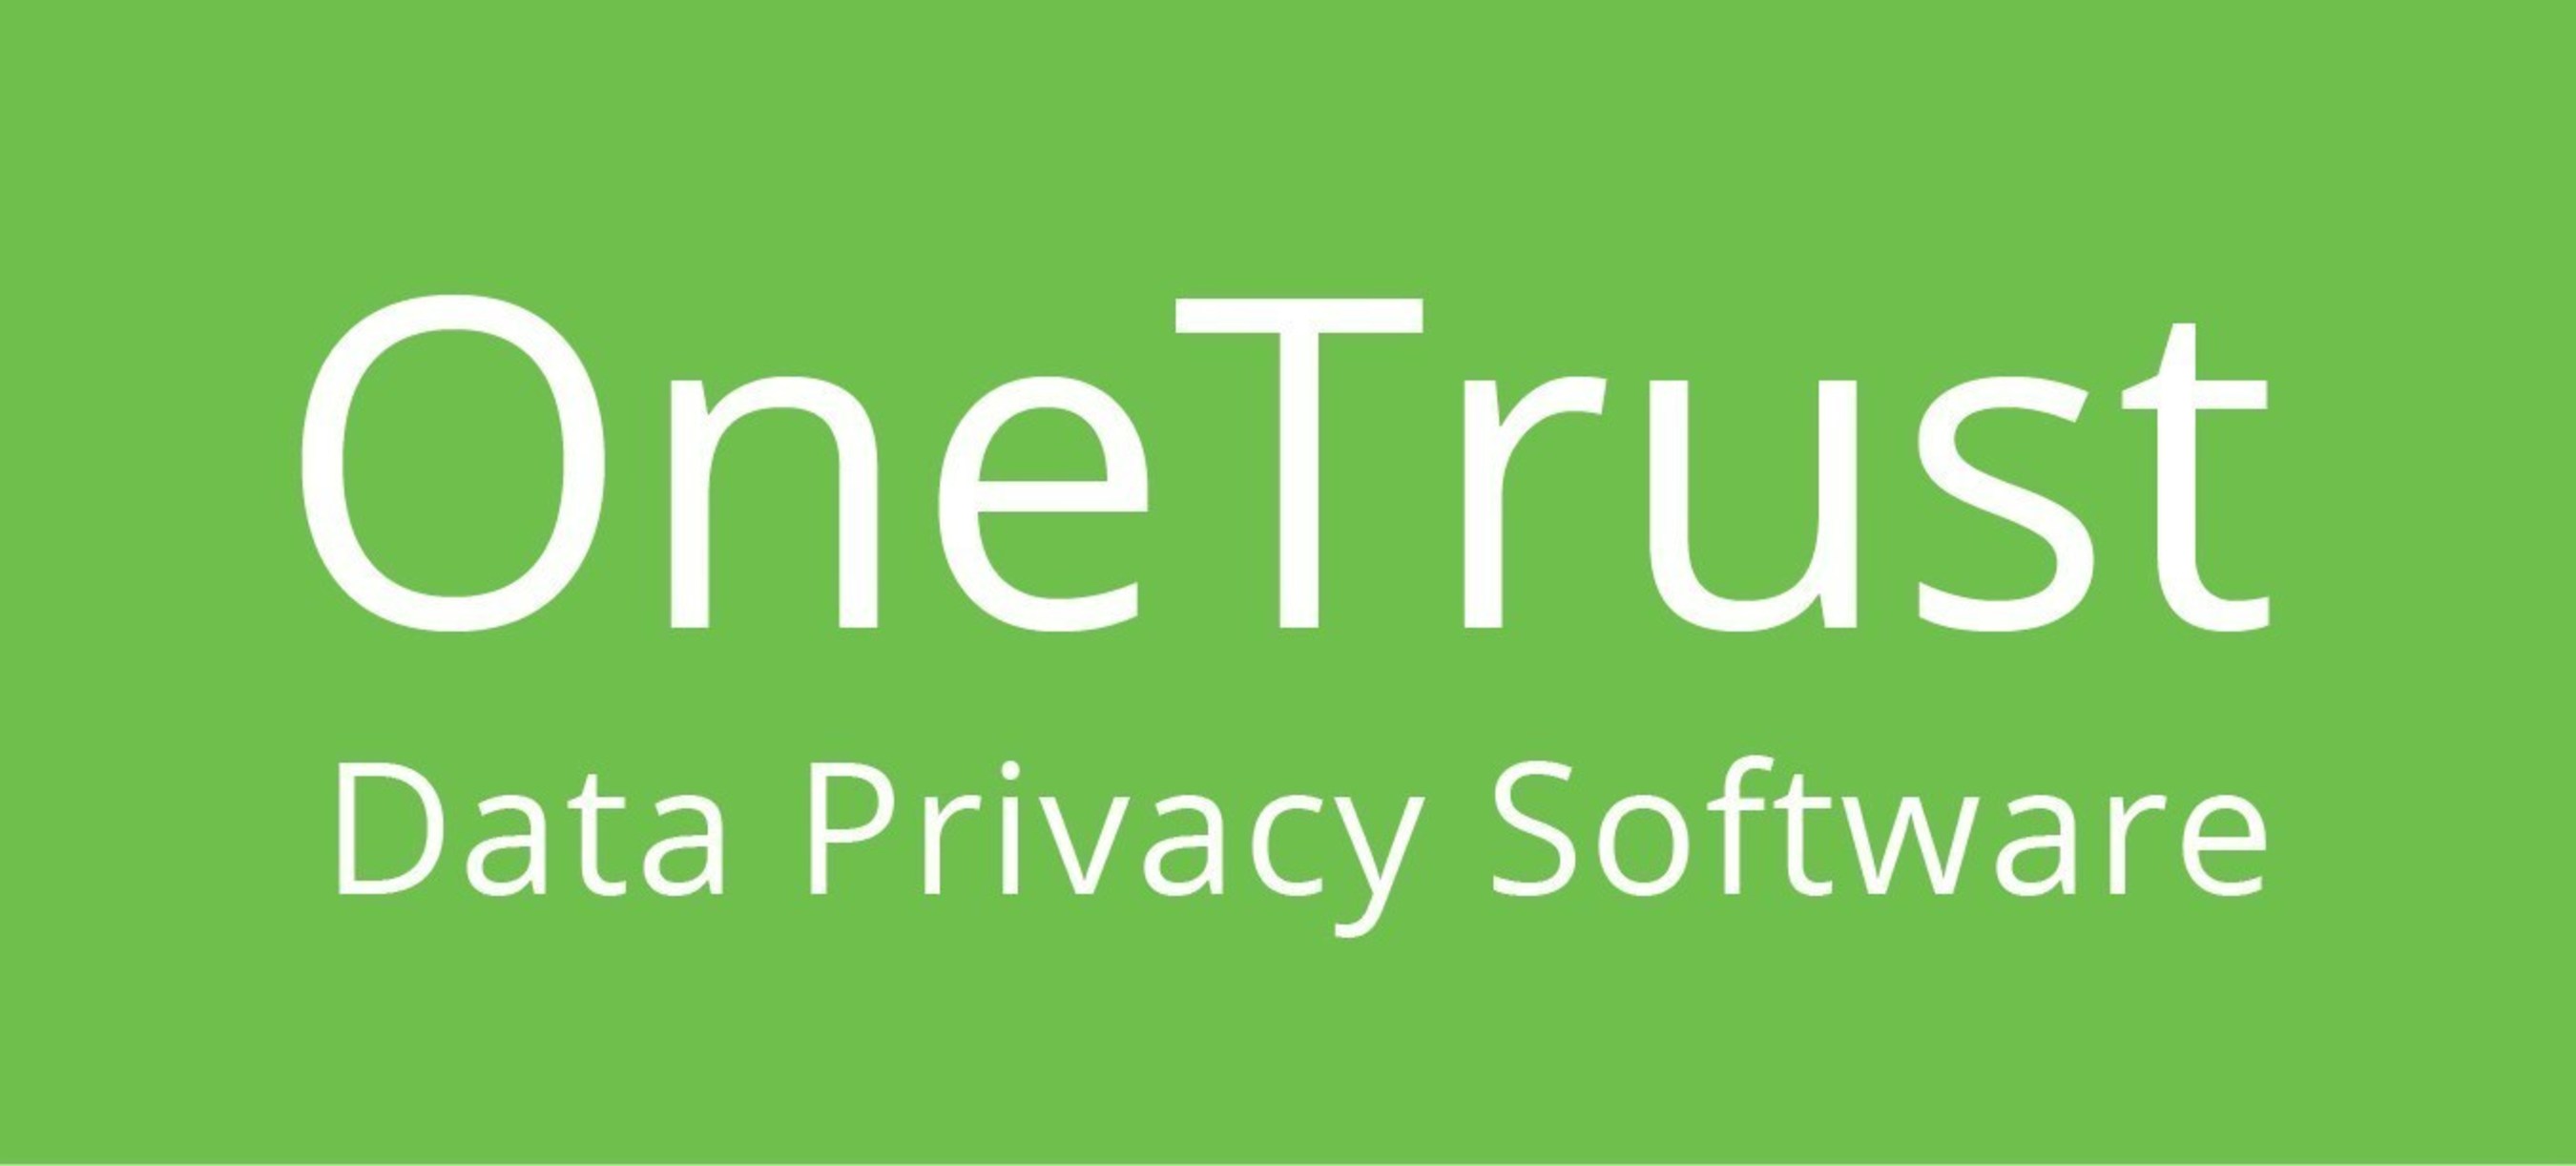 OneTrust Data Privacy Software